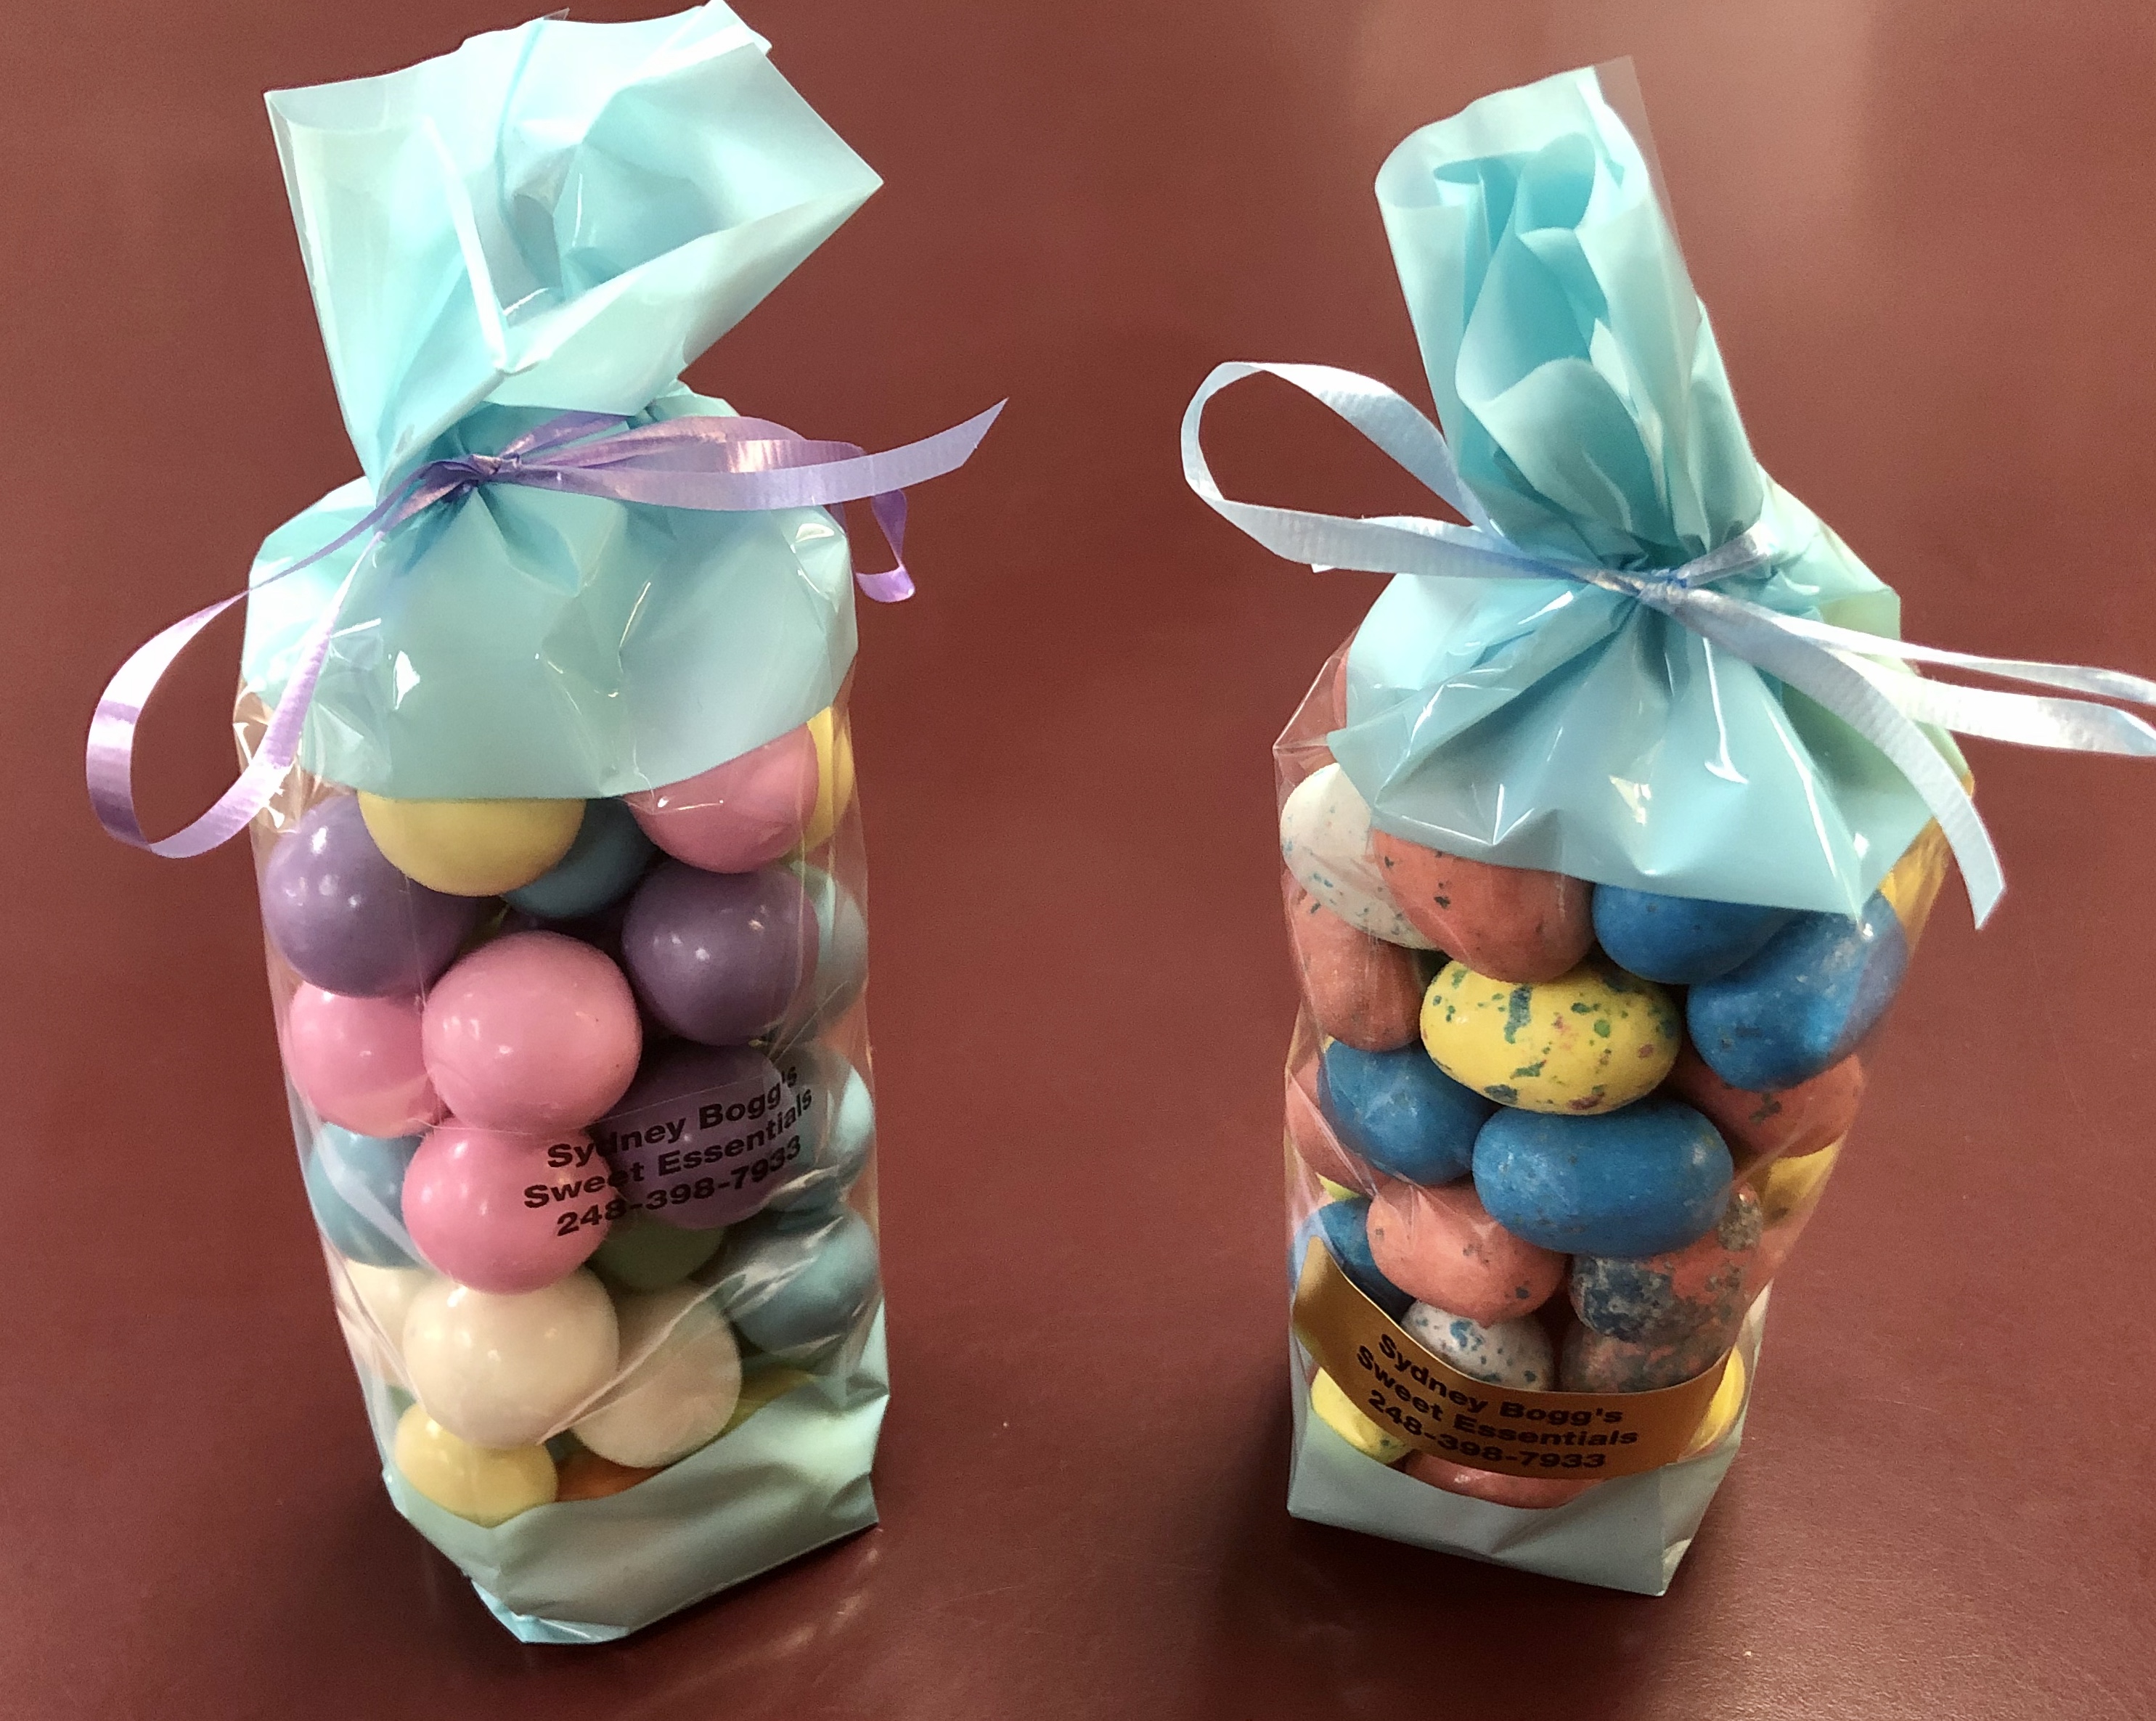 Malted milk balls and eggs